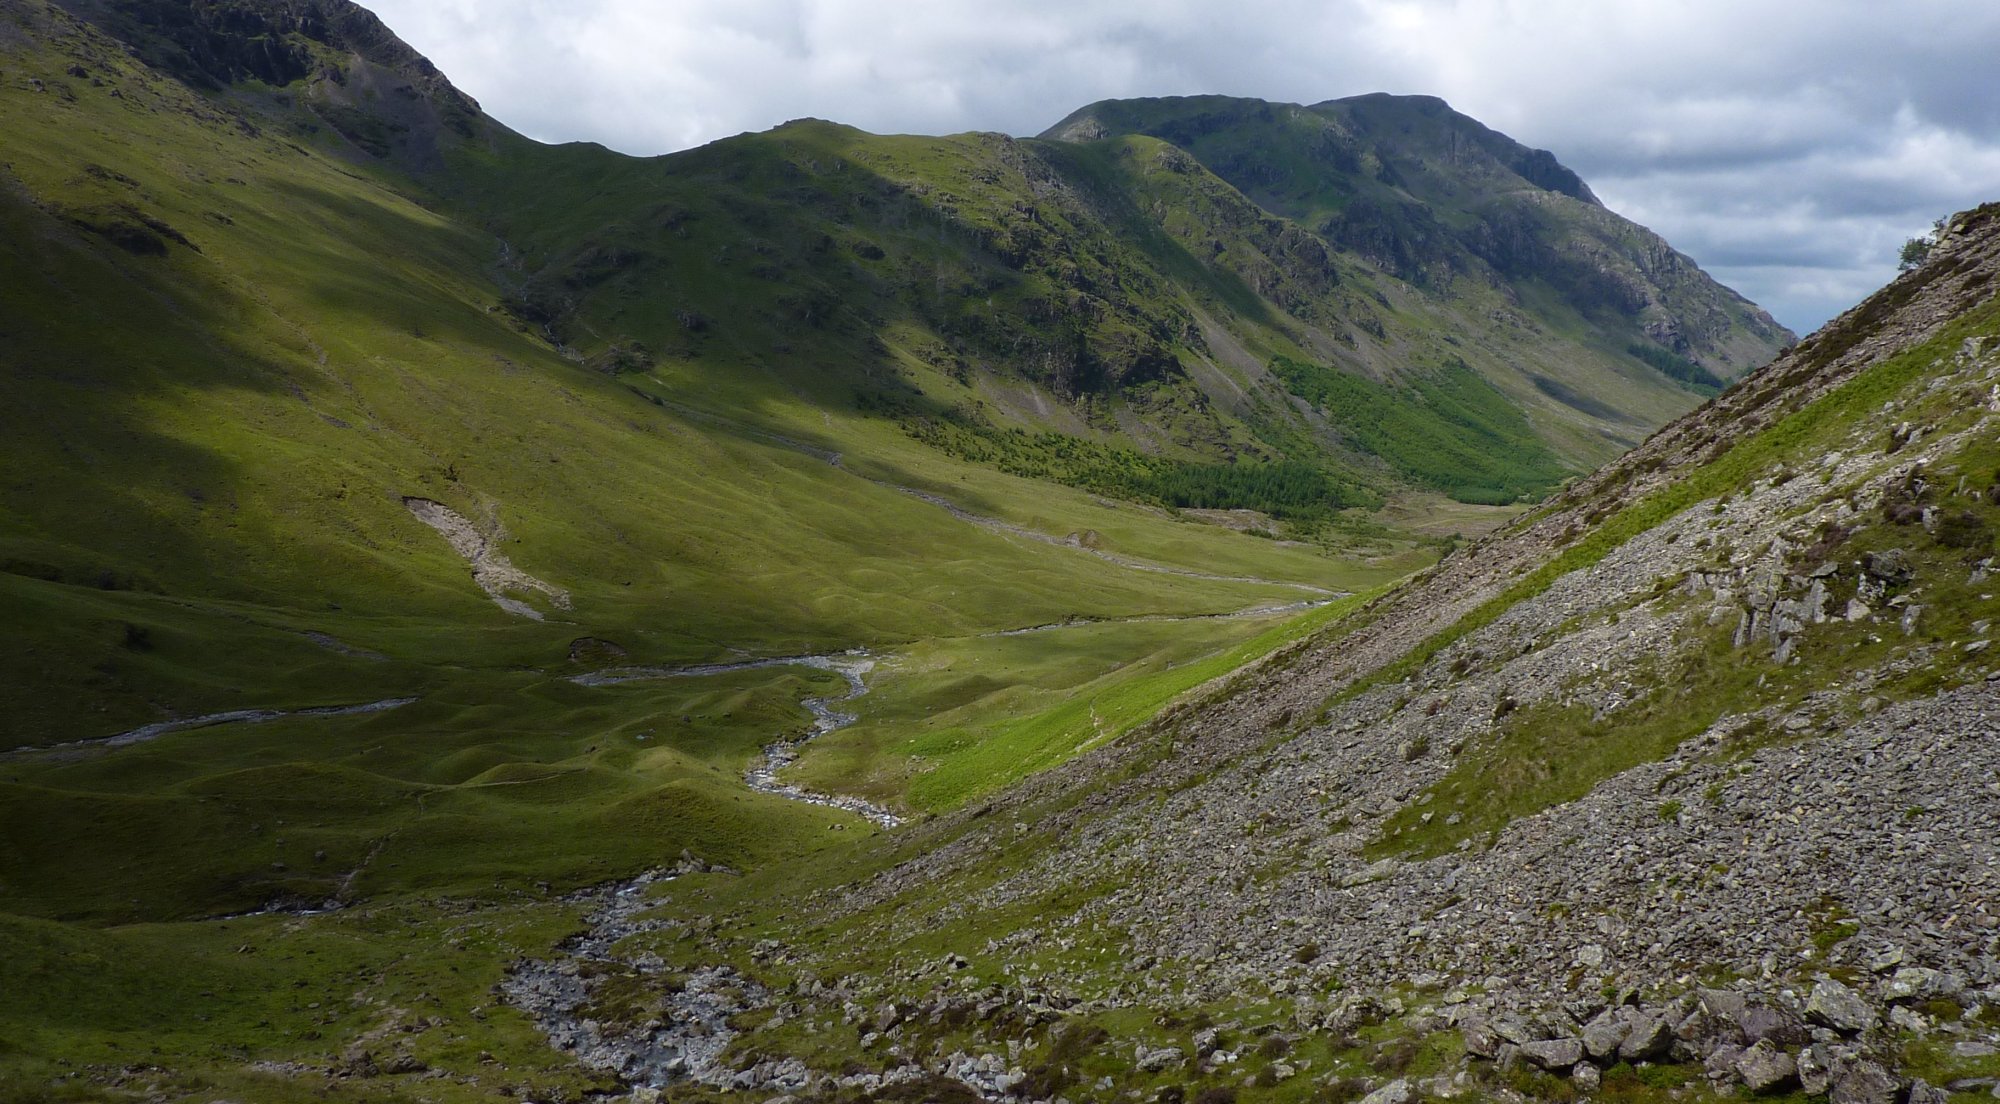 At the foot of Loft Beck, looking along Ennerdale